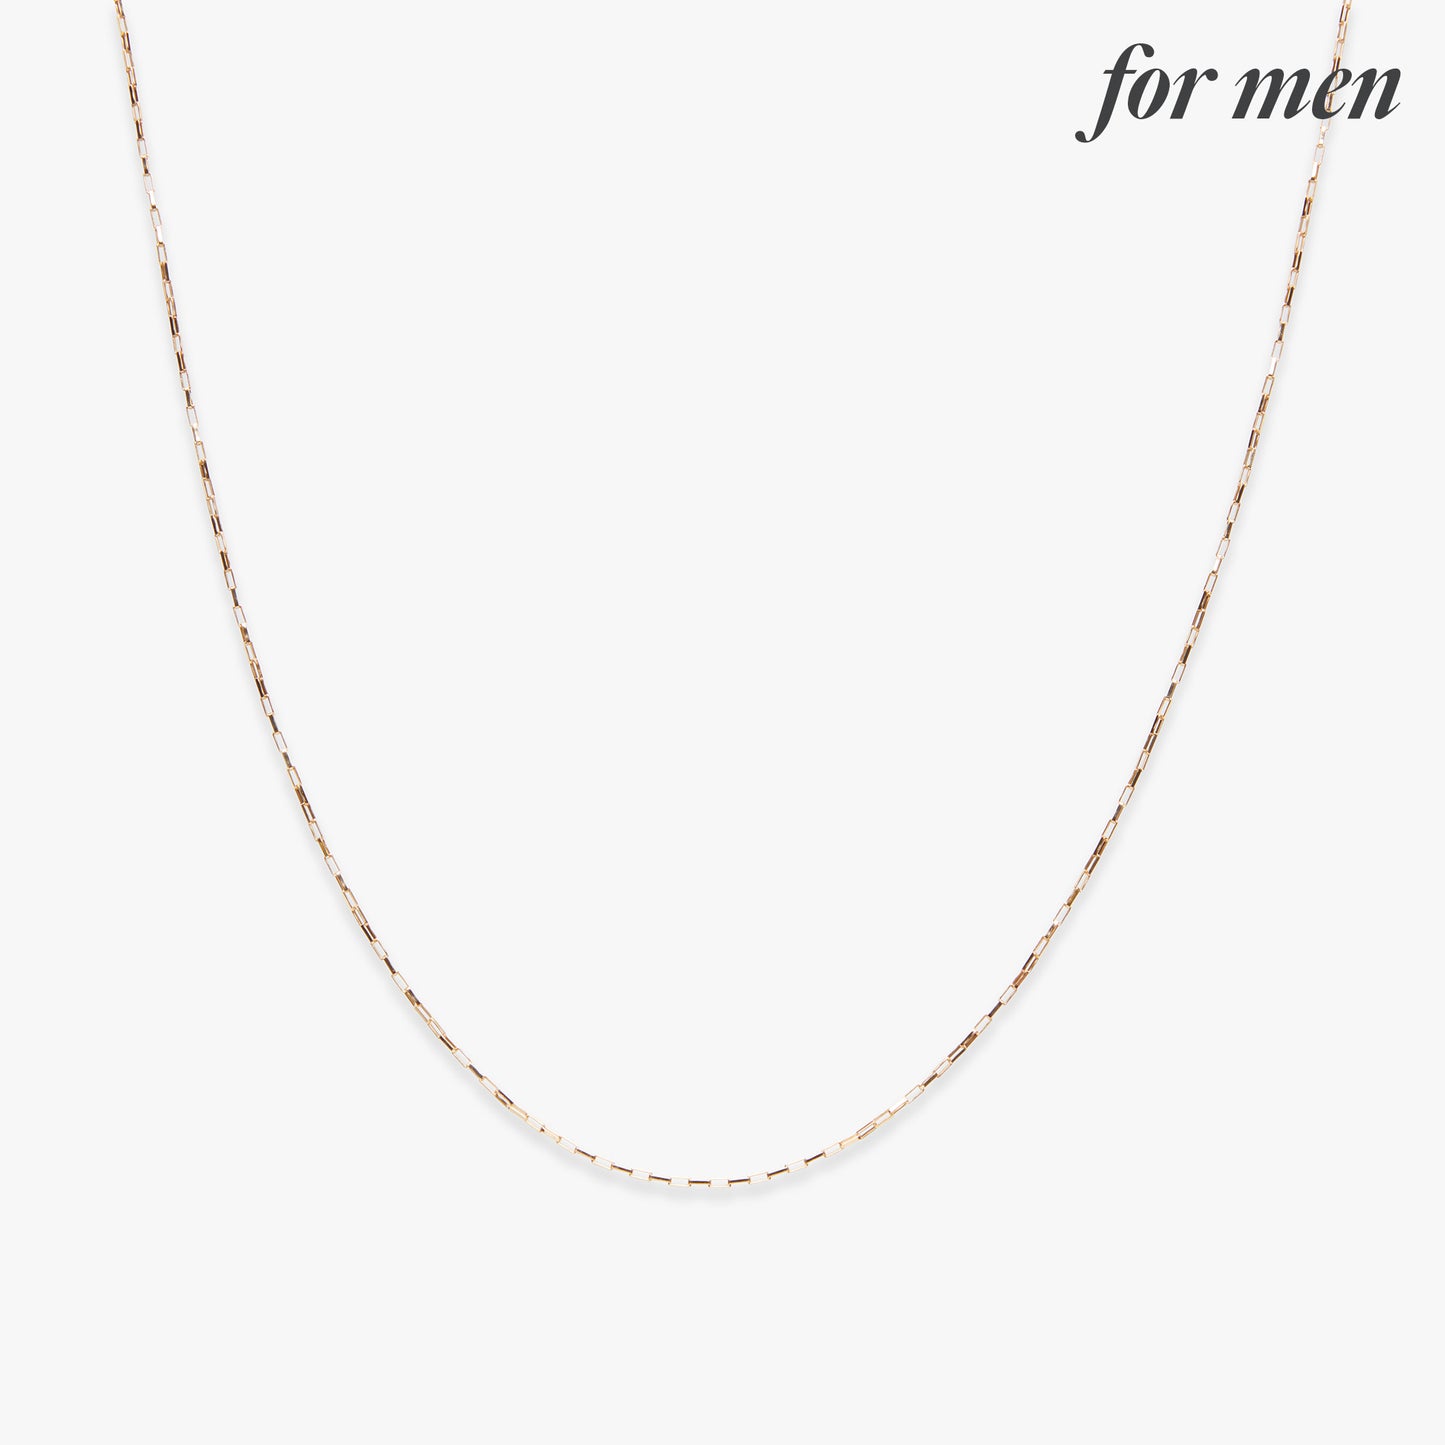 Box chain necklace gold filled for men